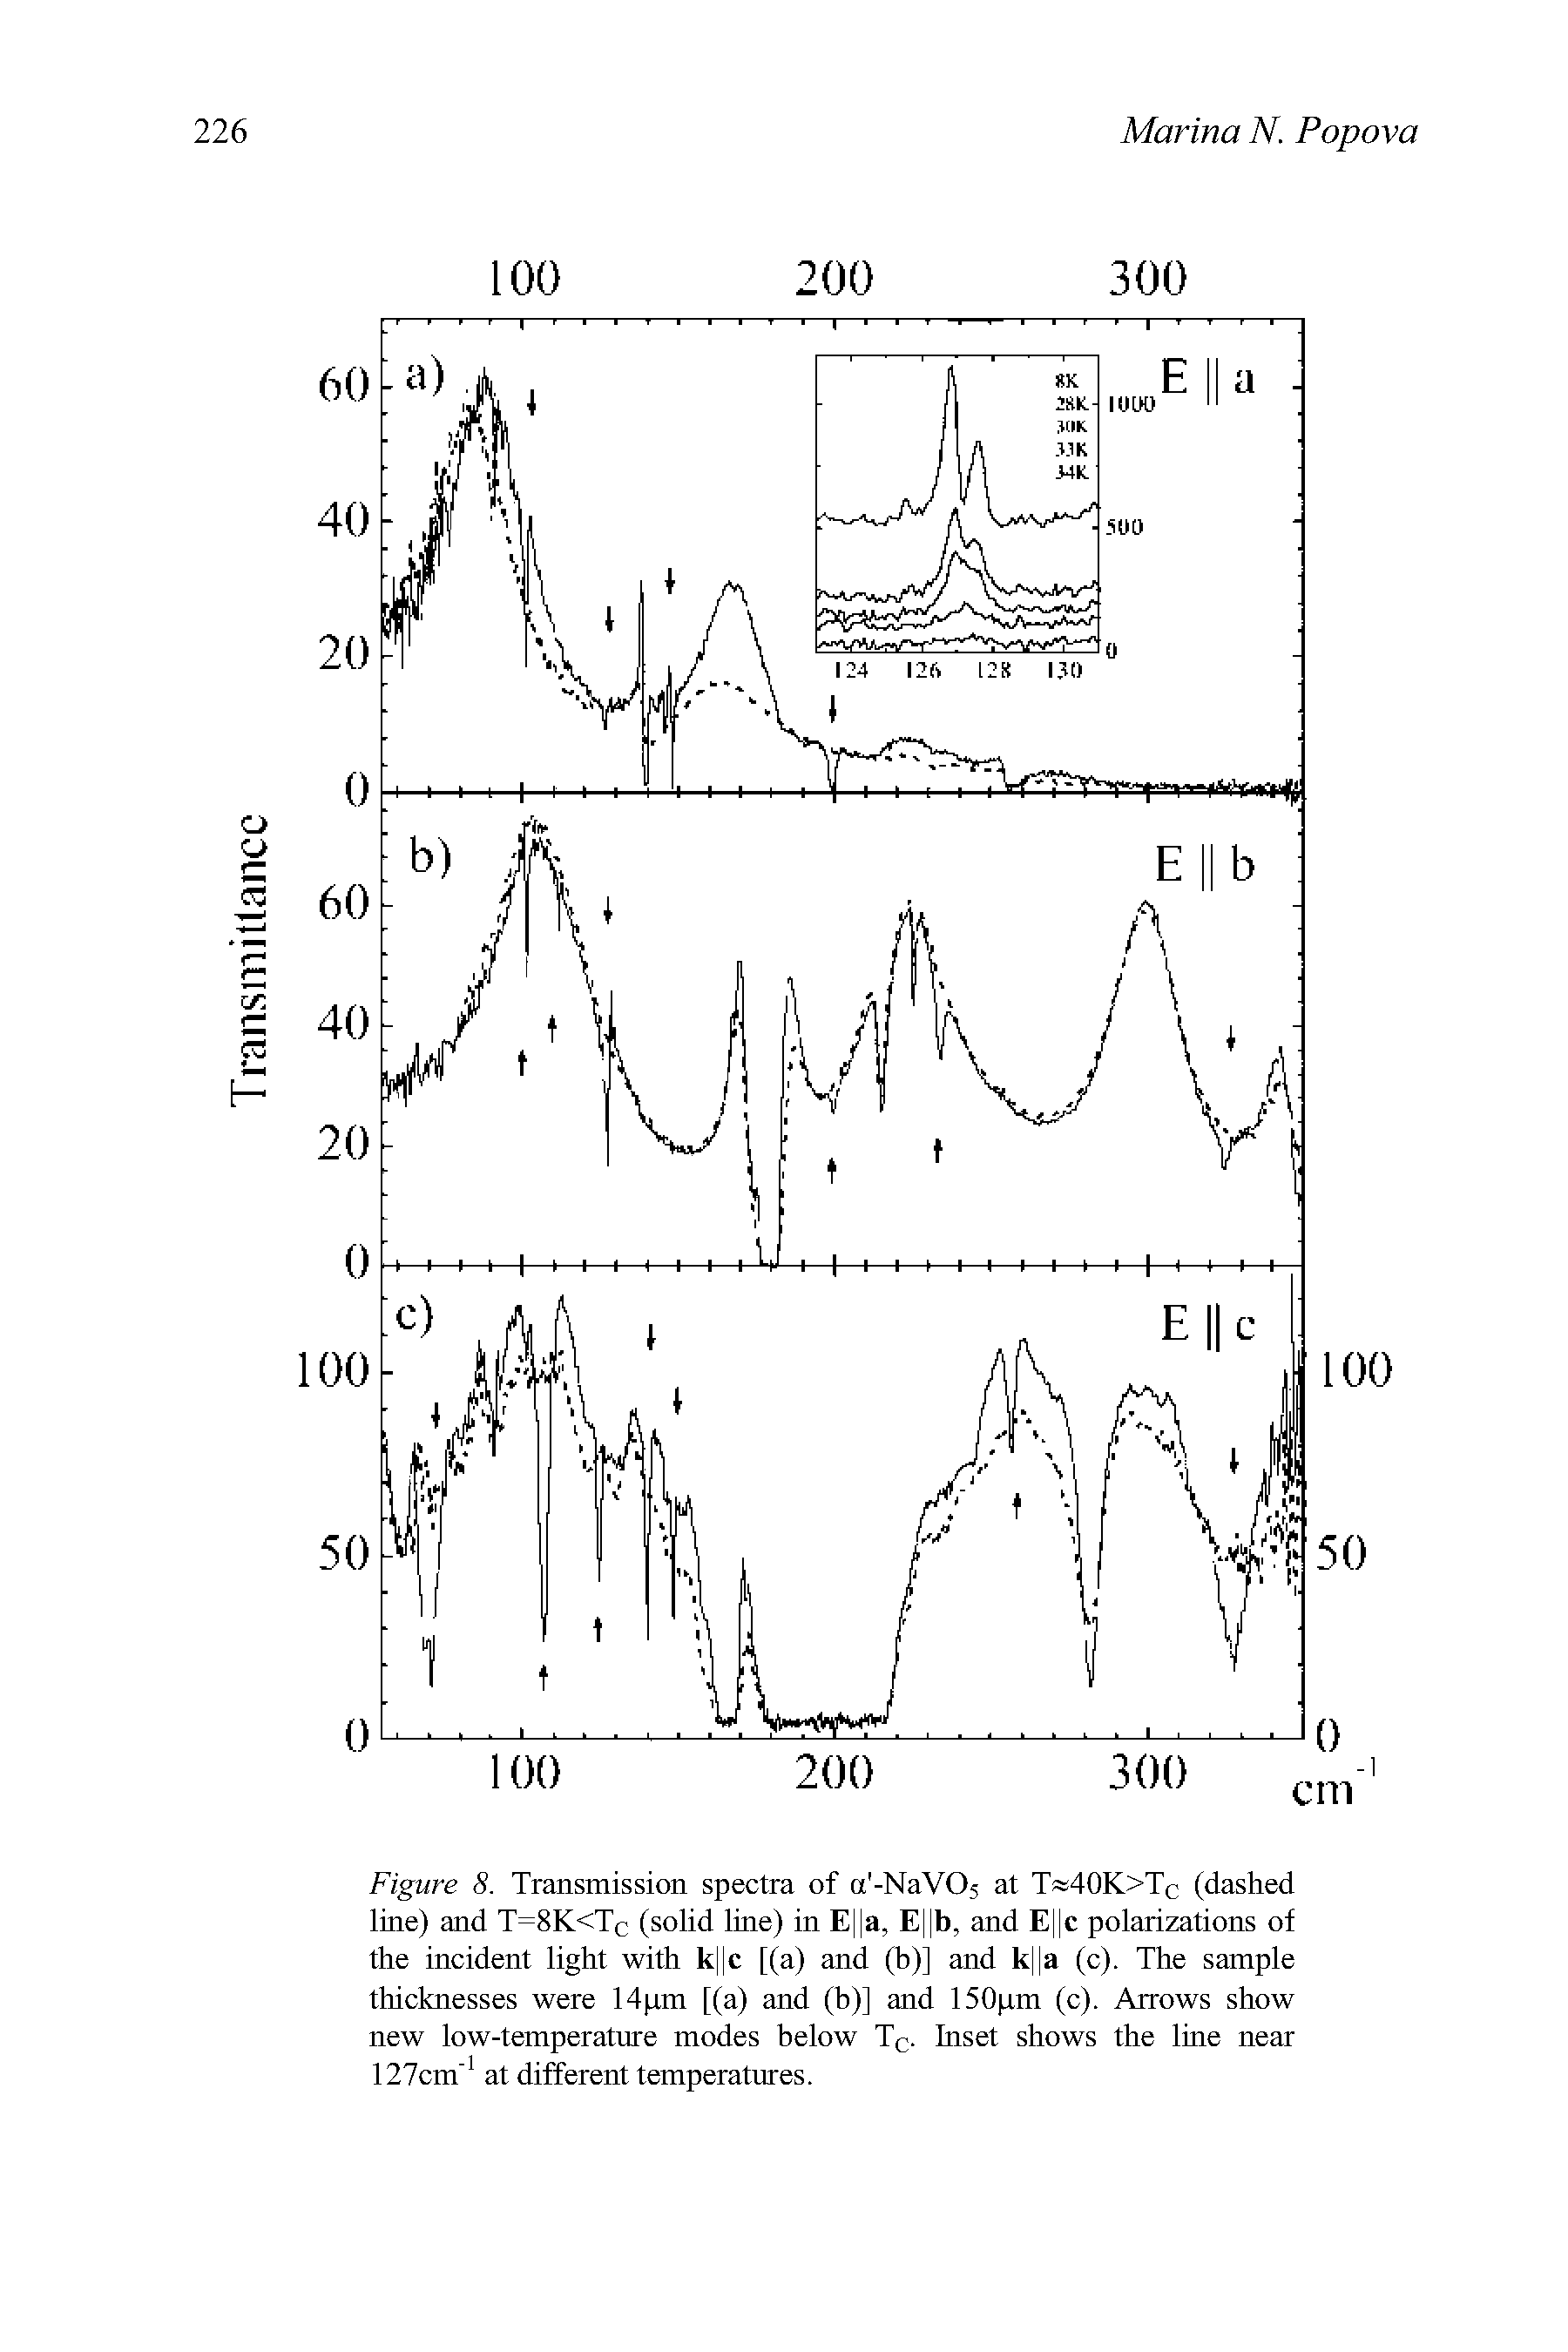 Figure 8. Transmission spectra of a -NaVOs at T 40K>TC (dashed line) and T=8K<TC (solid line) in E a, E b, and E c polarizations of the incident light with k c [(a) and (b)] and k a (c). The sample thicknesses were 14pm [(a) and (b)] and 150pm (c). Arrows show new low-temperature modes below Tc. Inset shows the line near 127cm"1 at different temperatures.